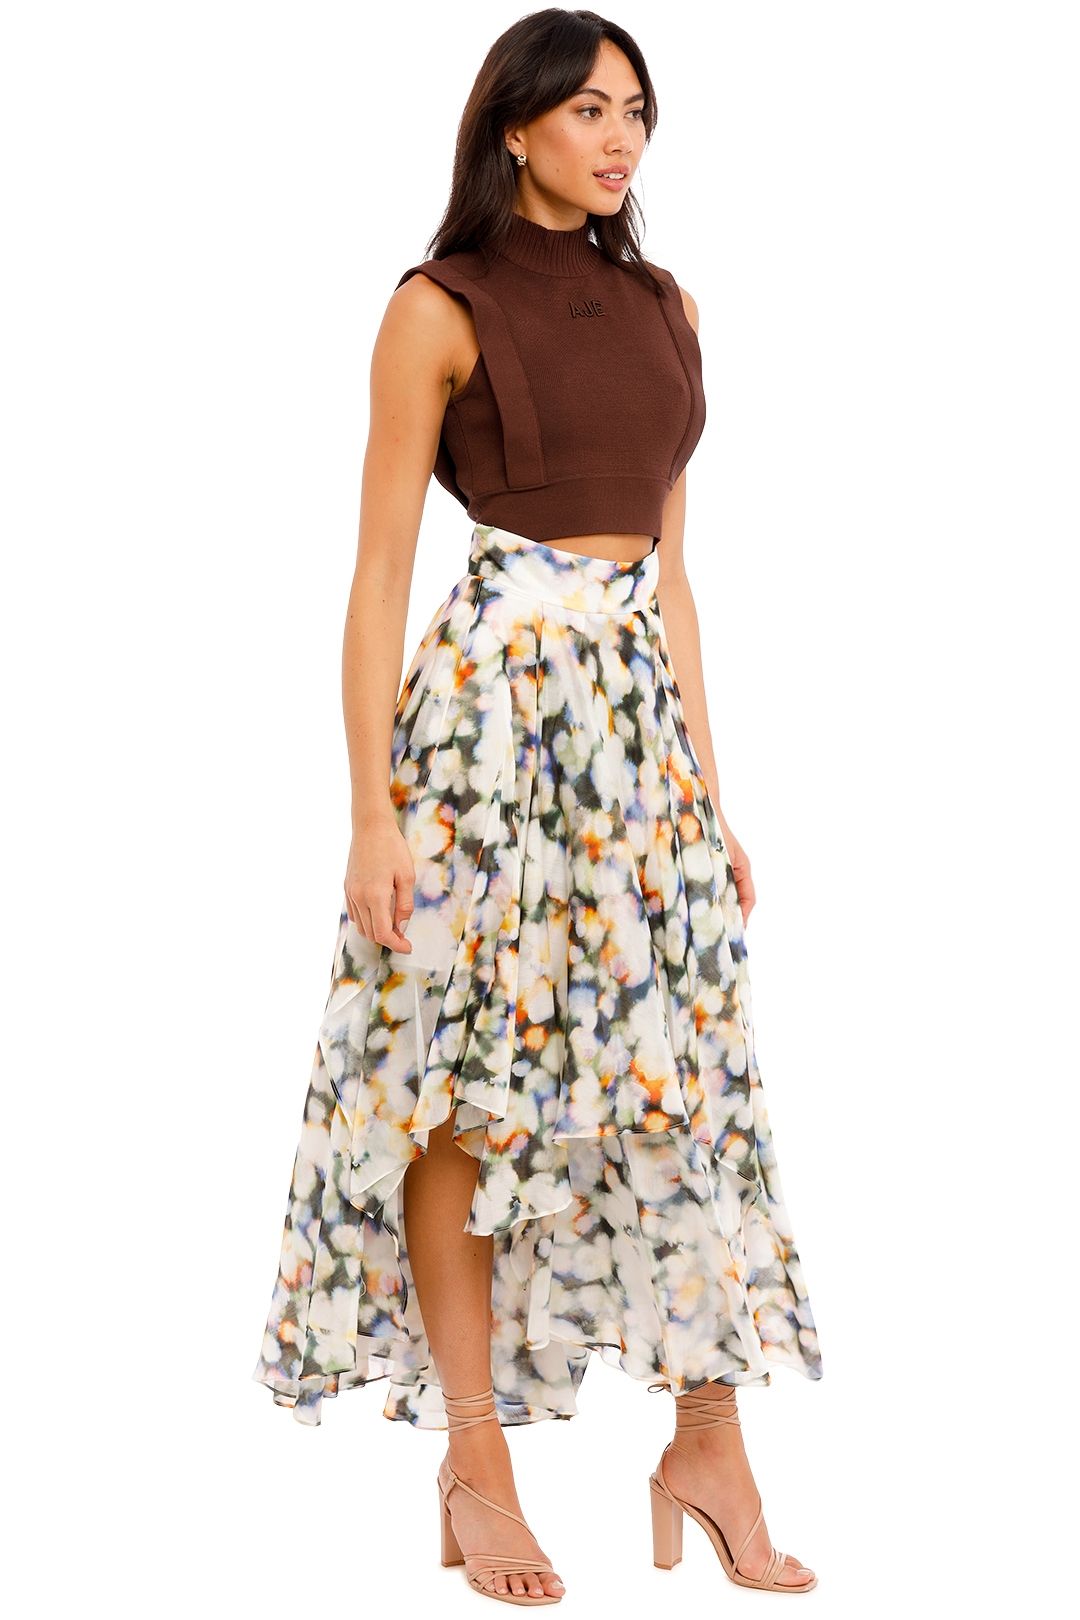 Lumiere Skirt in Lumiere Ginger and Smart abstract